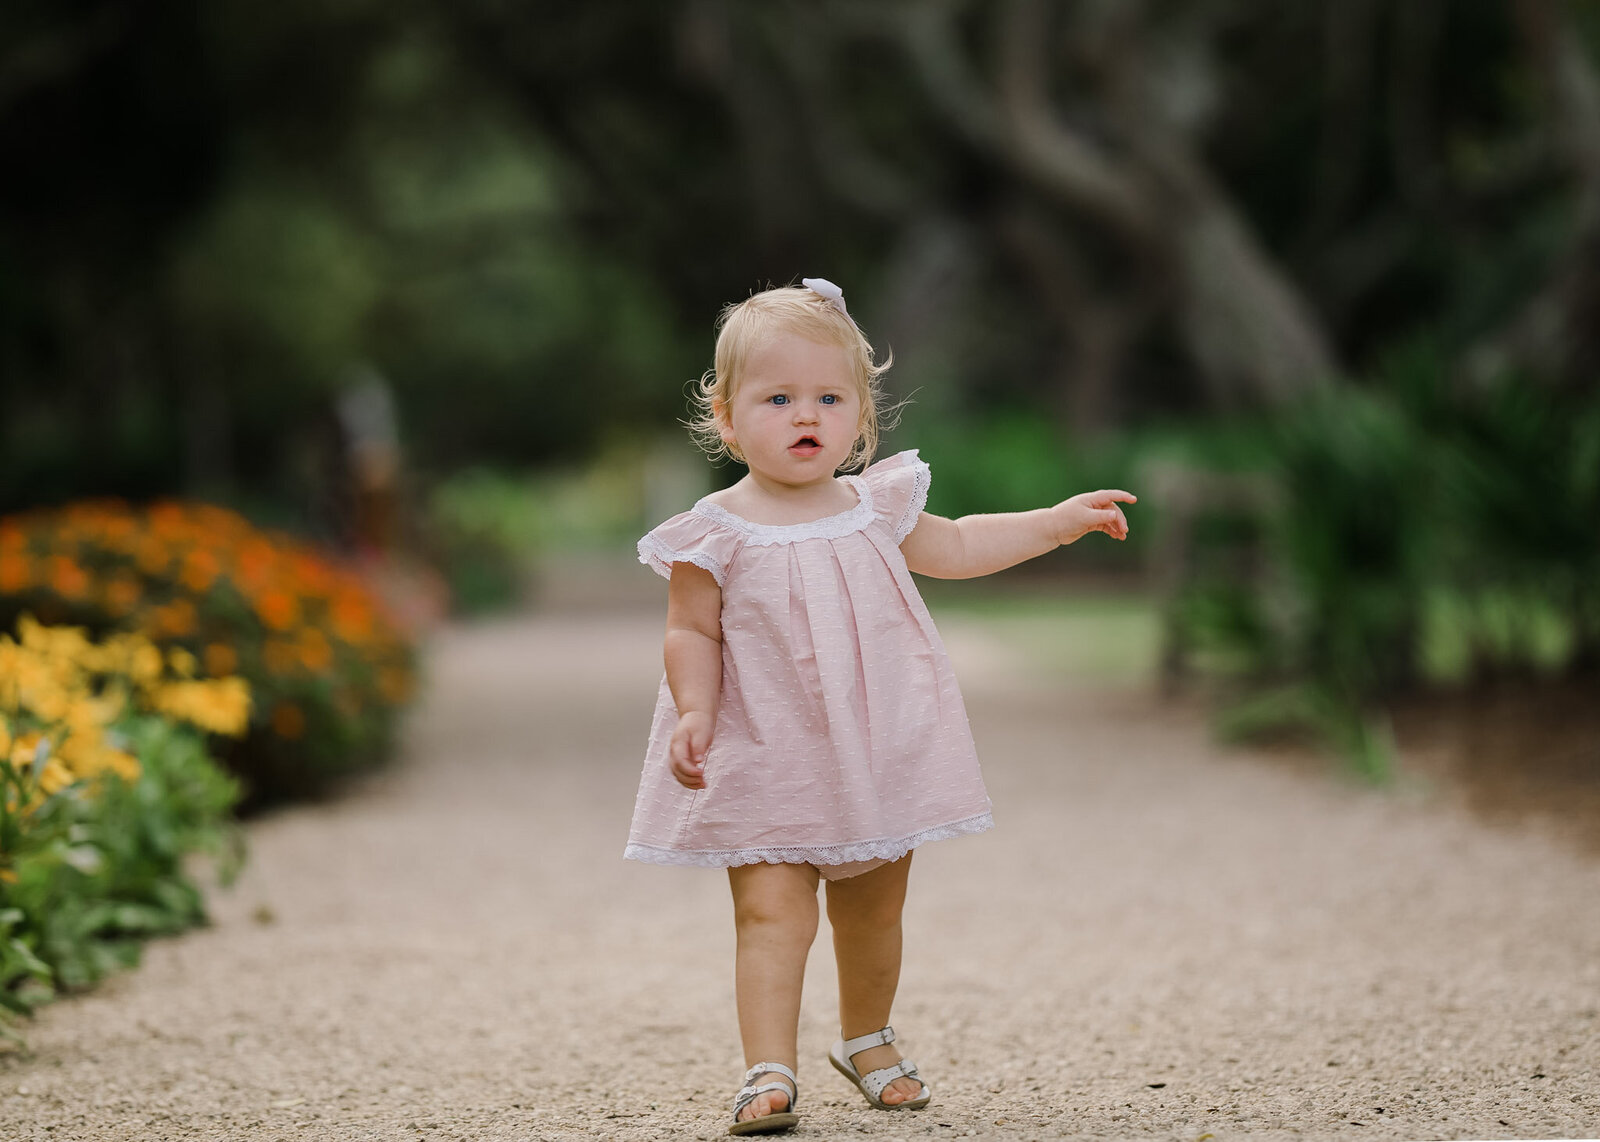 A toddler girl in a pink dress walks through a gravel garden path charlotte nc toy stores